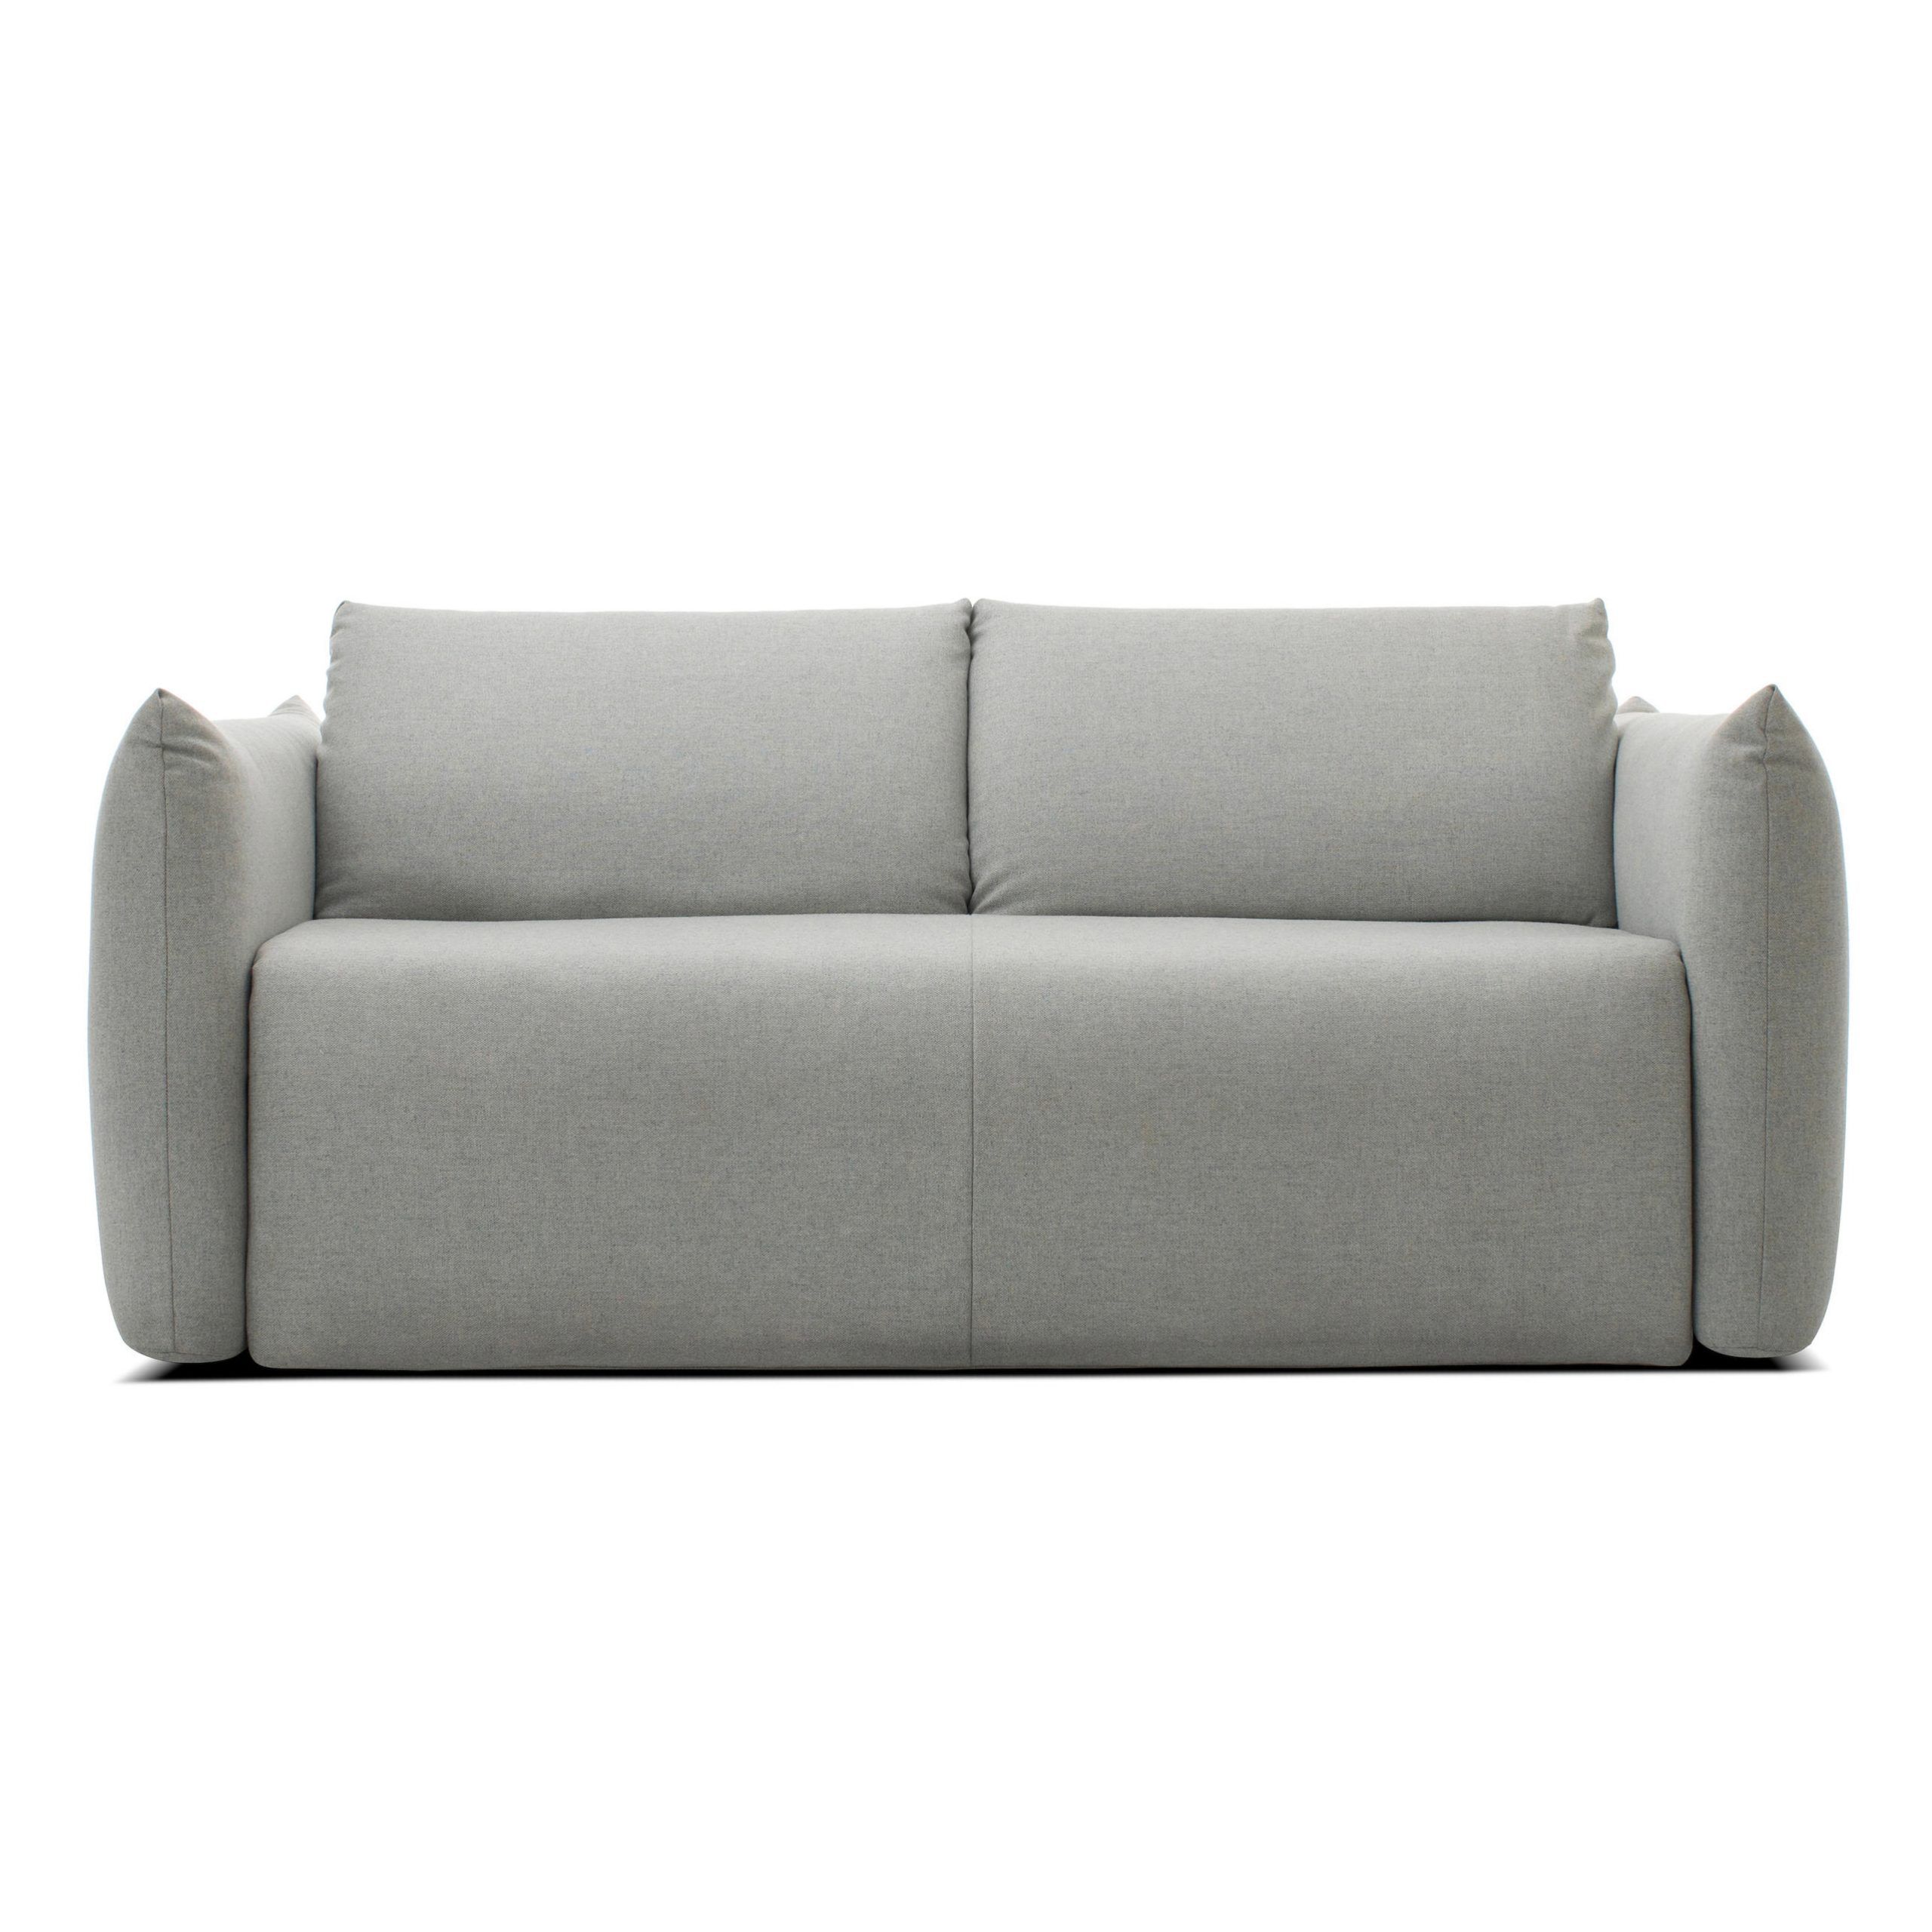 Luna Sofa Bed – Sofas From Extraform | Architonic Inside Luna Leather Sectional Sofas (View 9 of 15)